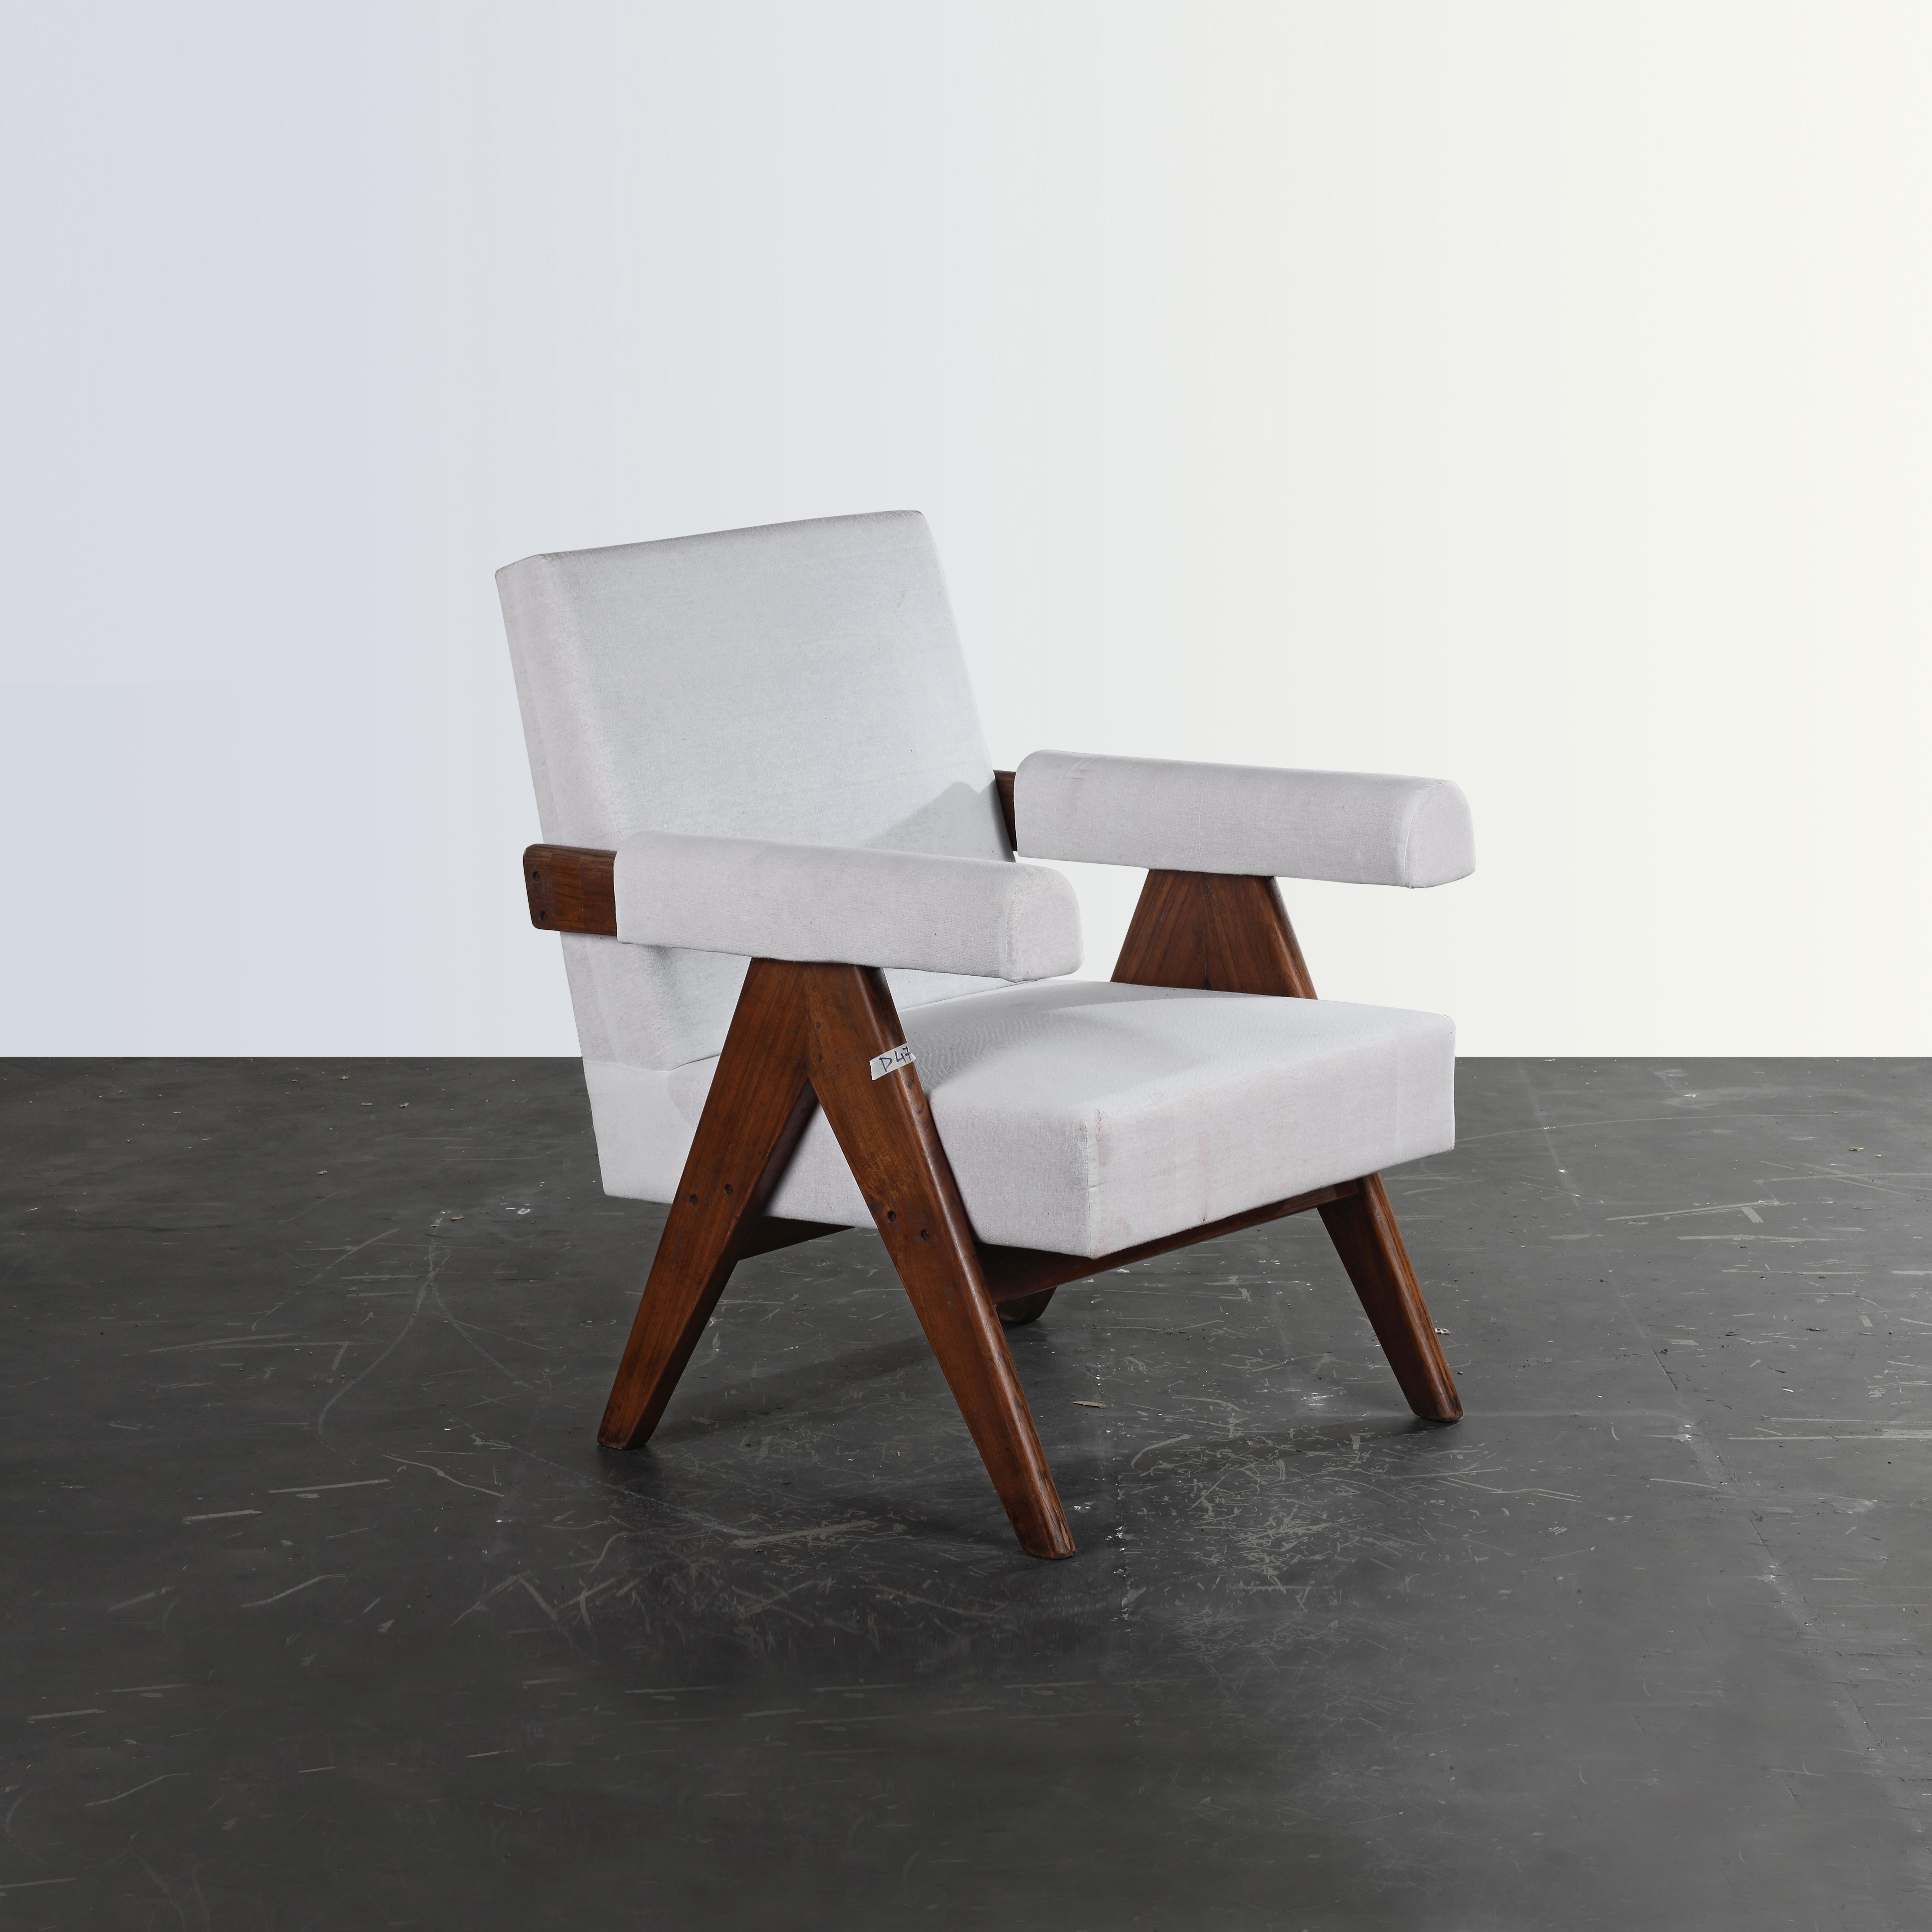 This iconic piece of furniture with its characteristic A-shaped profile is a rare classic of history. Through its sophisticated proportions and its elegant shape, the chair represents the timeless mindset of modernist architecture and design. It